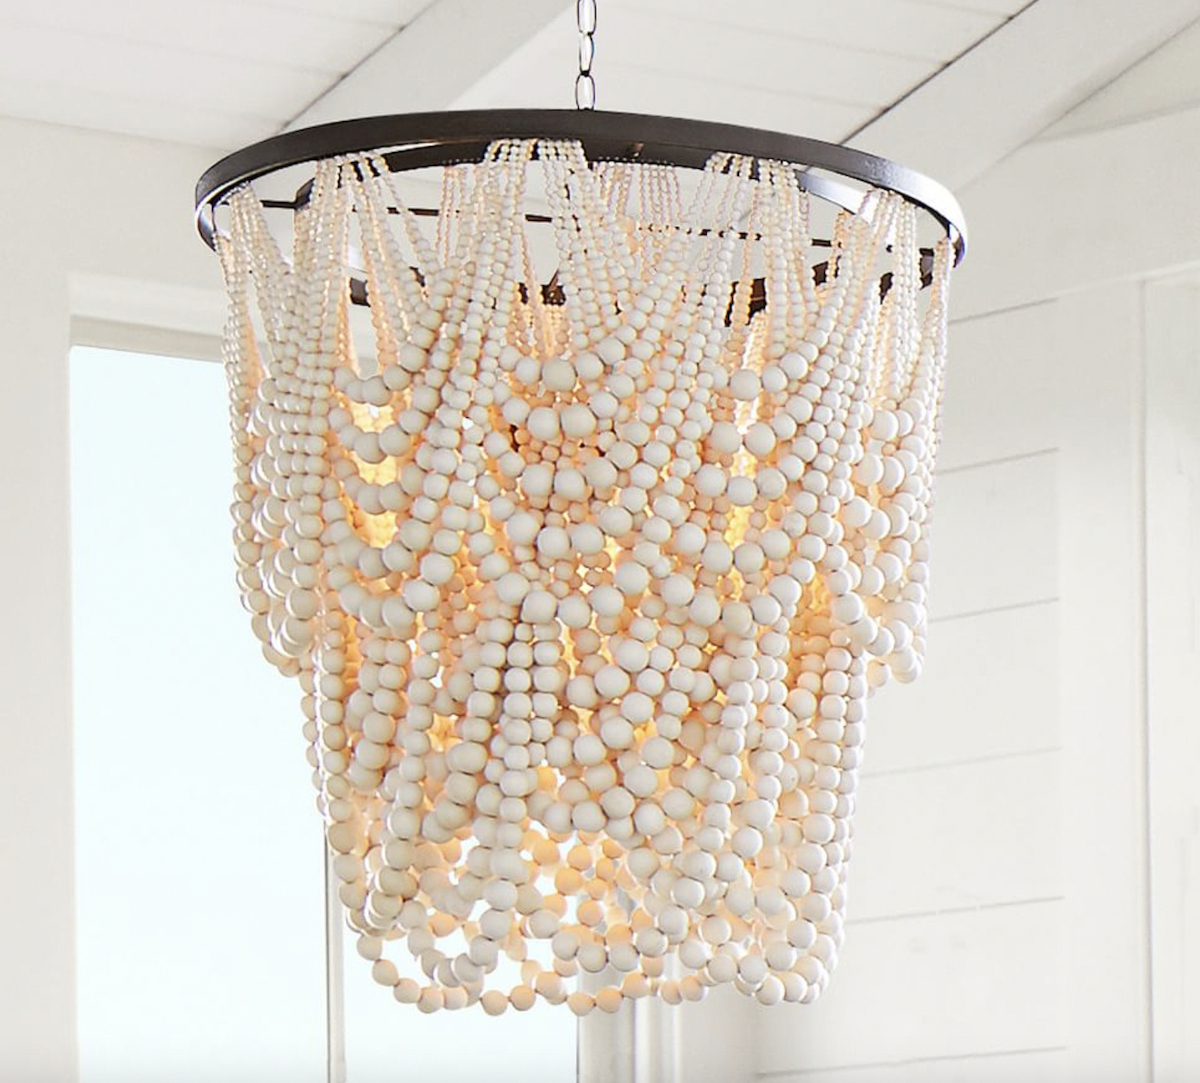 white wood bead garland chandelier lit up hanging from white ceiling